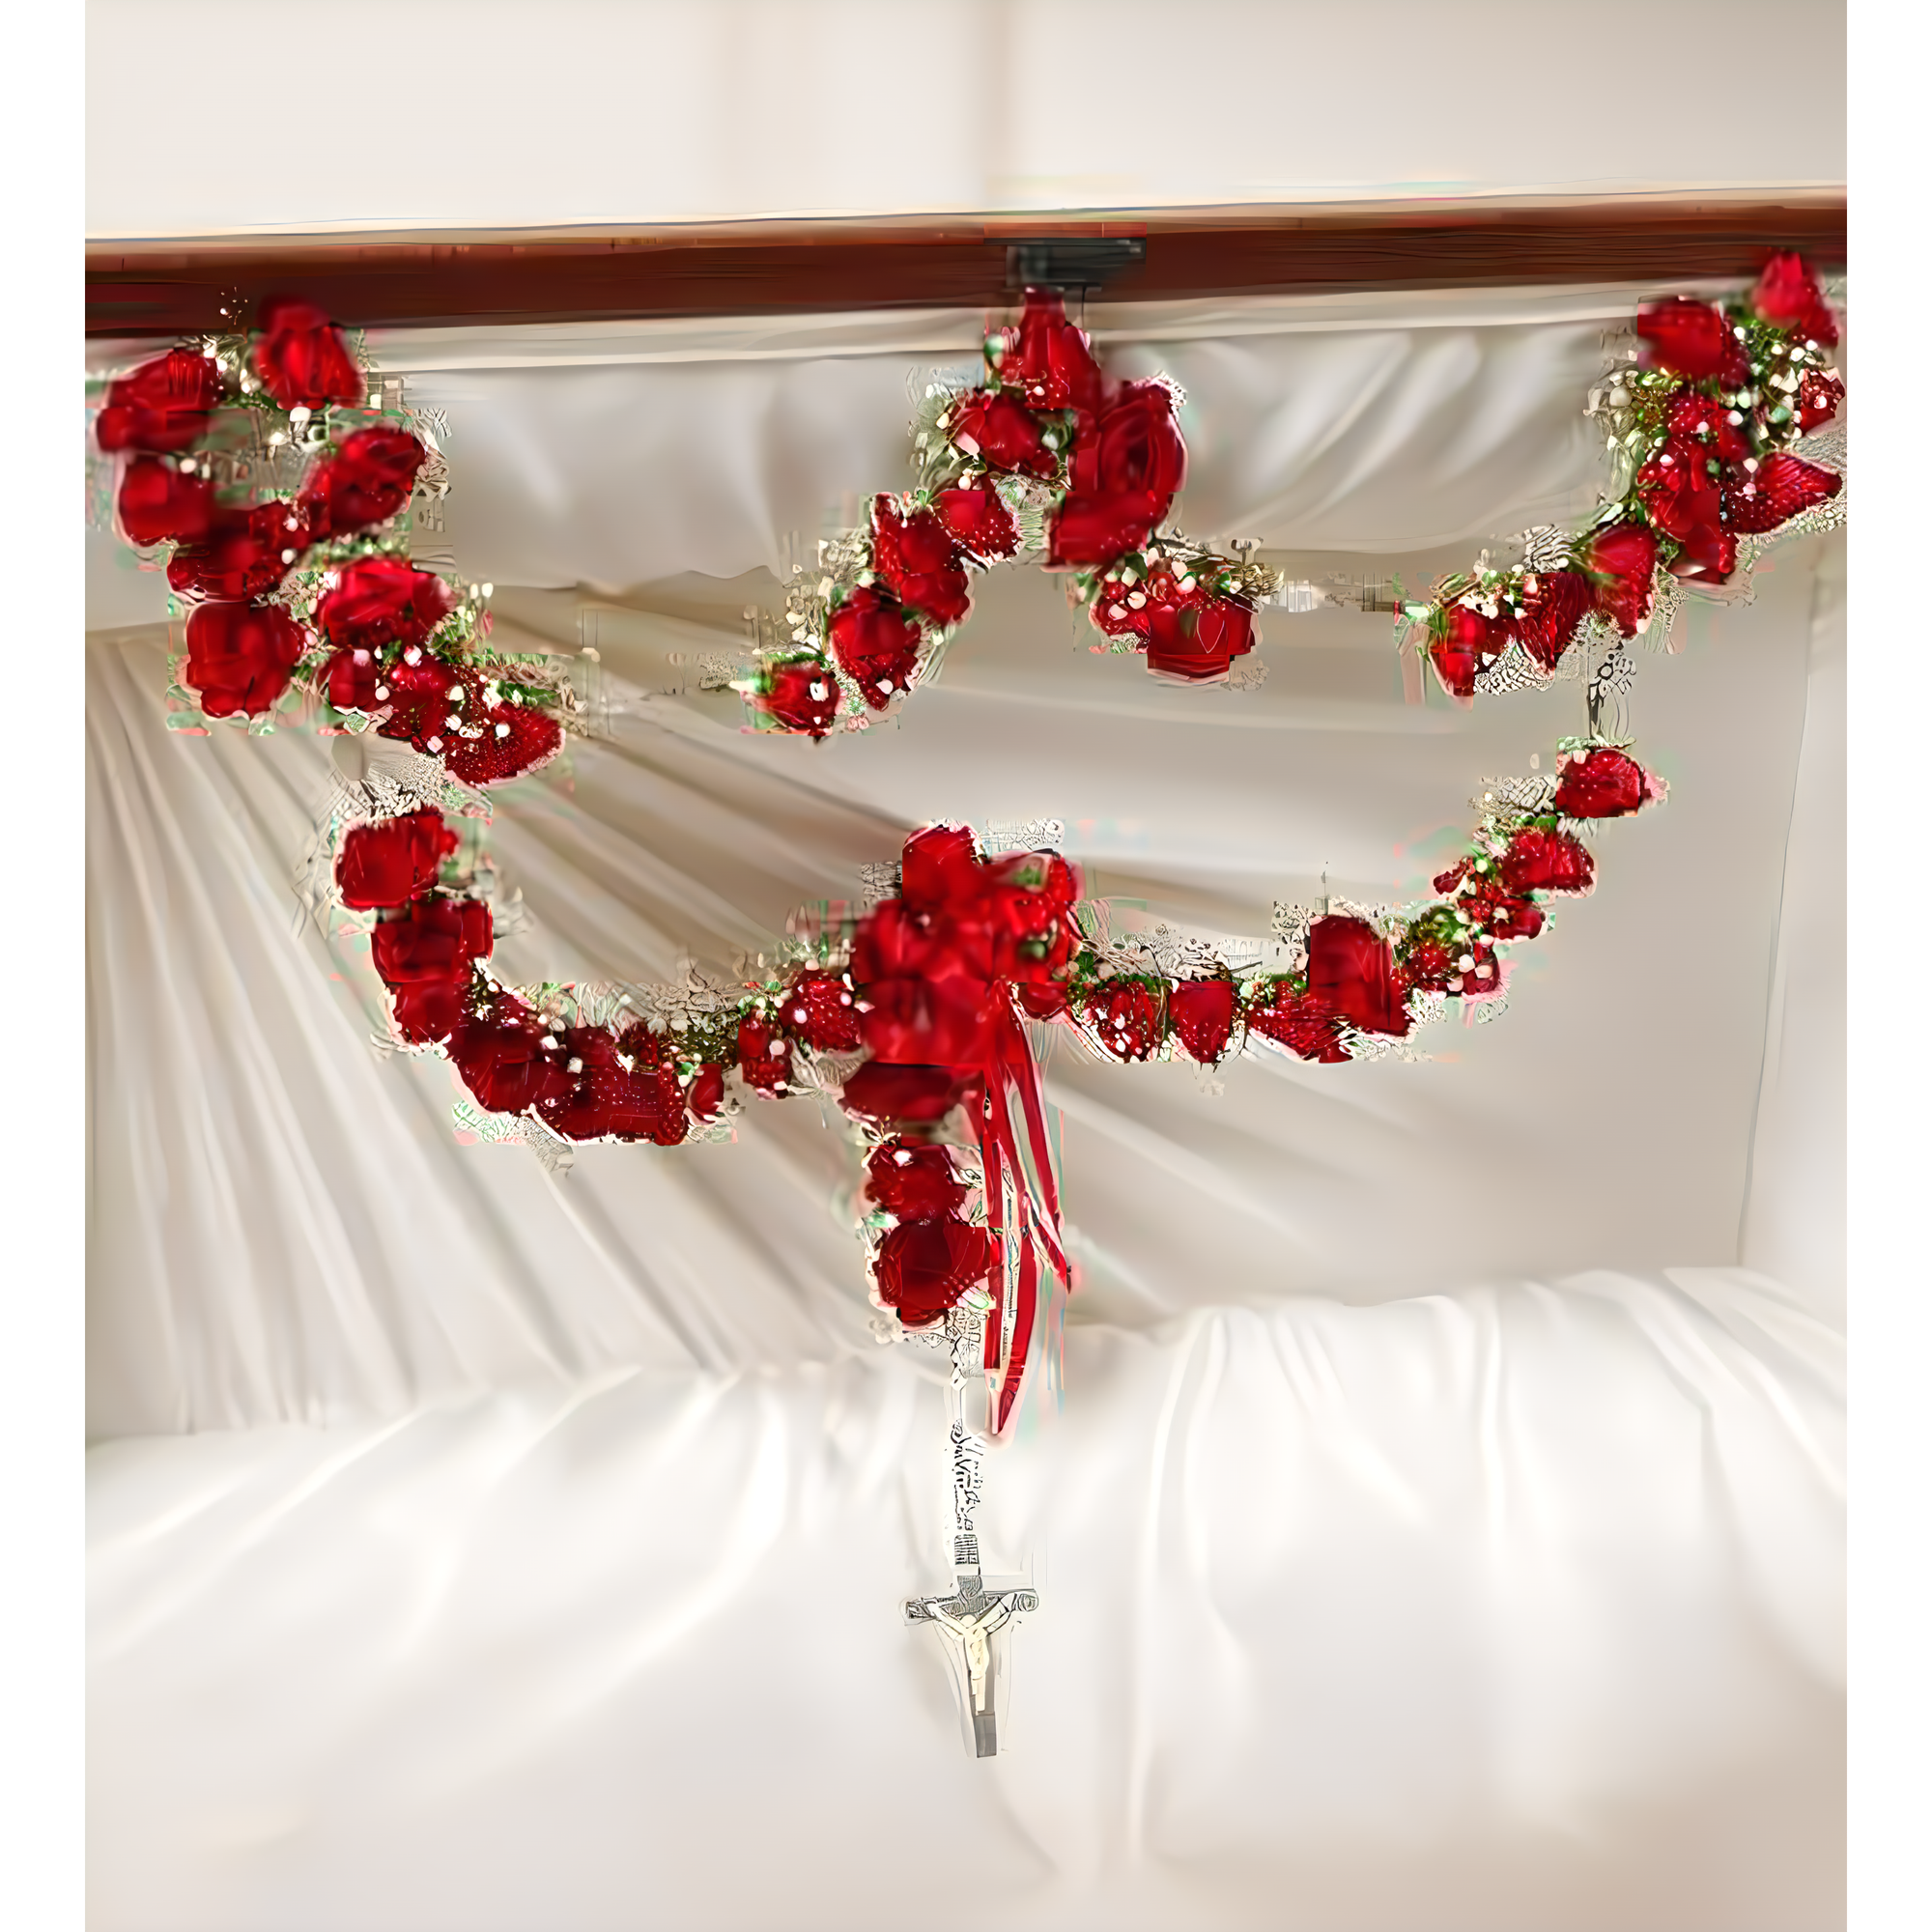 NYC Flower Delivery - Large Rosary with Red Spray Roses - Funeral > Casket Sprays